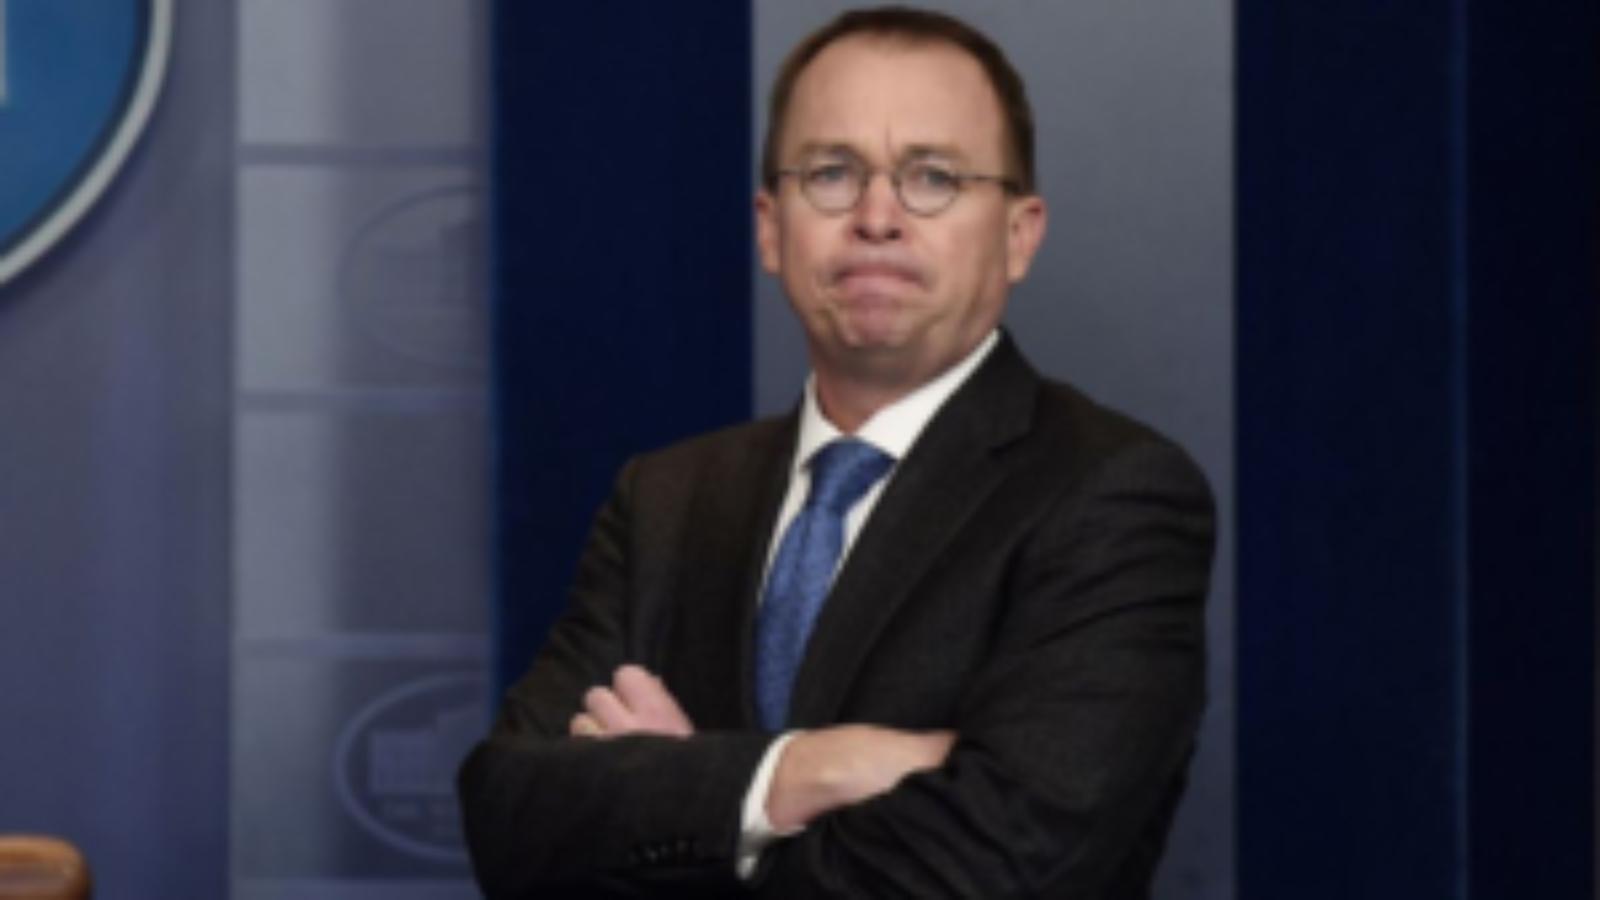 Mick Mulvaney Director of the Office of Management and Budget